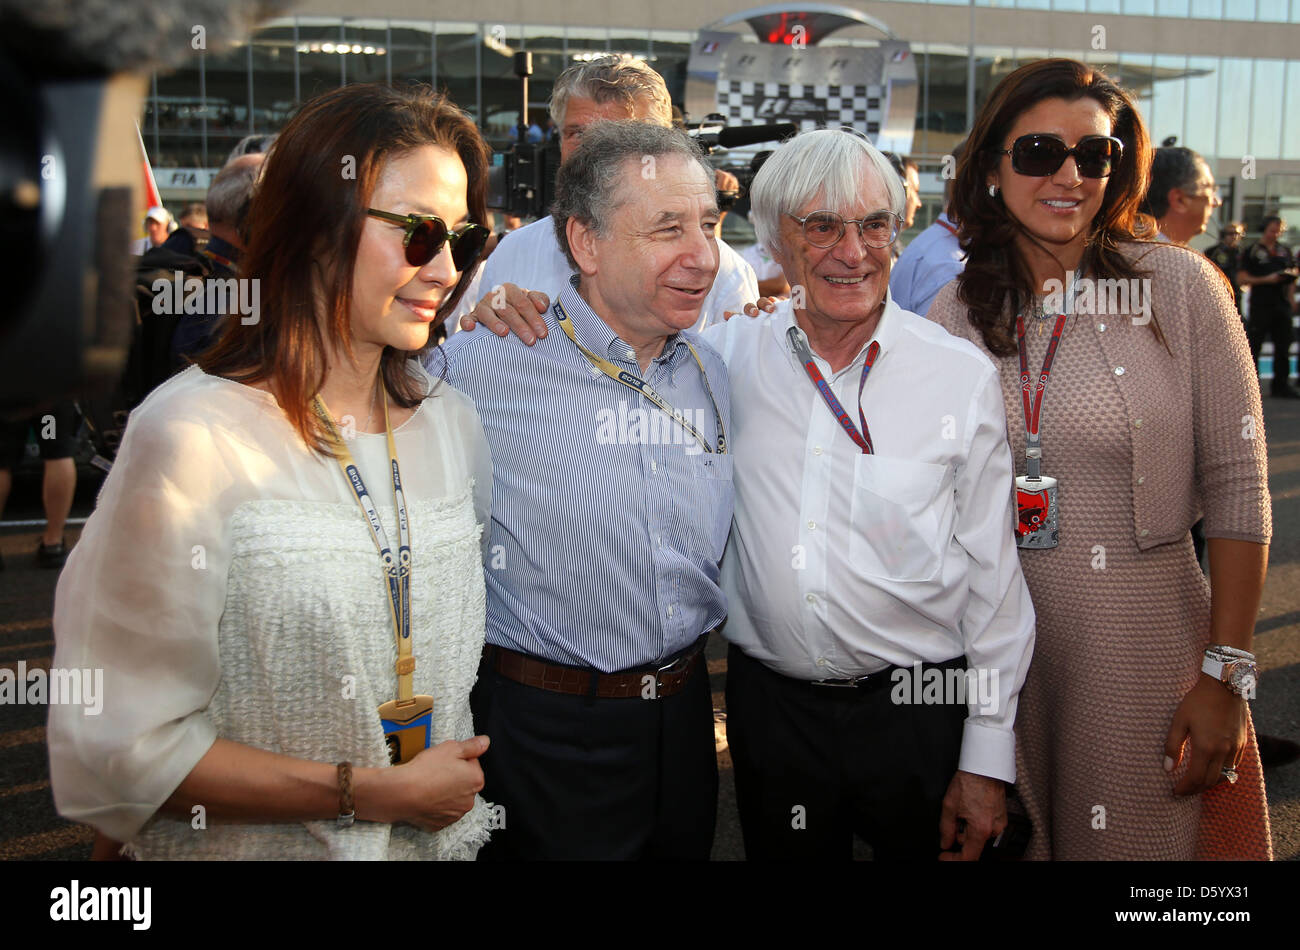 British Formula One Boss Bernie Ecclestone (2.R), his girlfriend Fabiana Flosi (R), French FIA-President Jean Todt (2.L.) and his girlfriend, actress Michelle Yeoh (L) seen before the start of the Formula One Grand Prix of Abu Dhabi at the Yas Marina Circuit in Abu Dhabi, United Arab Emirates, 04 November 2012. Photo: Jens Buettner/dpa Stock Photo